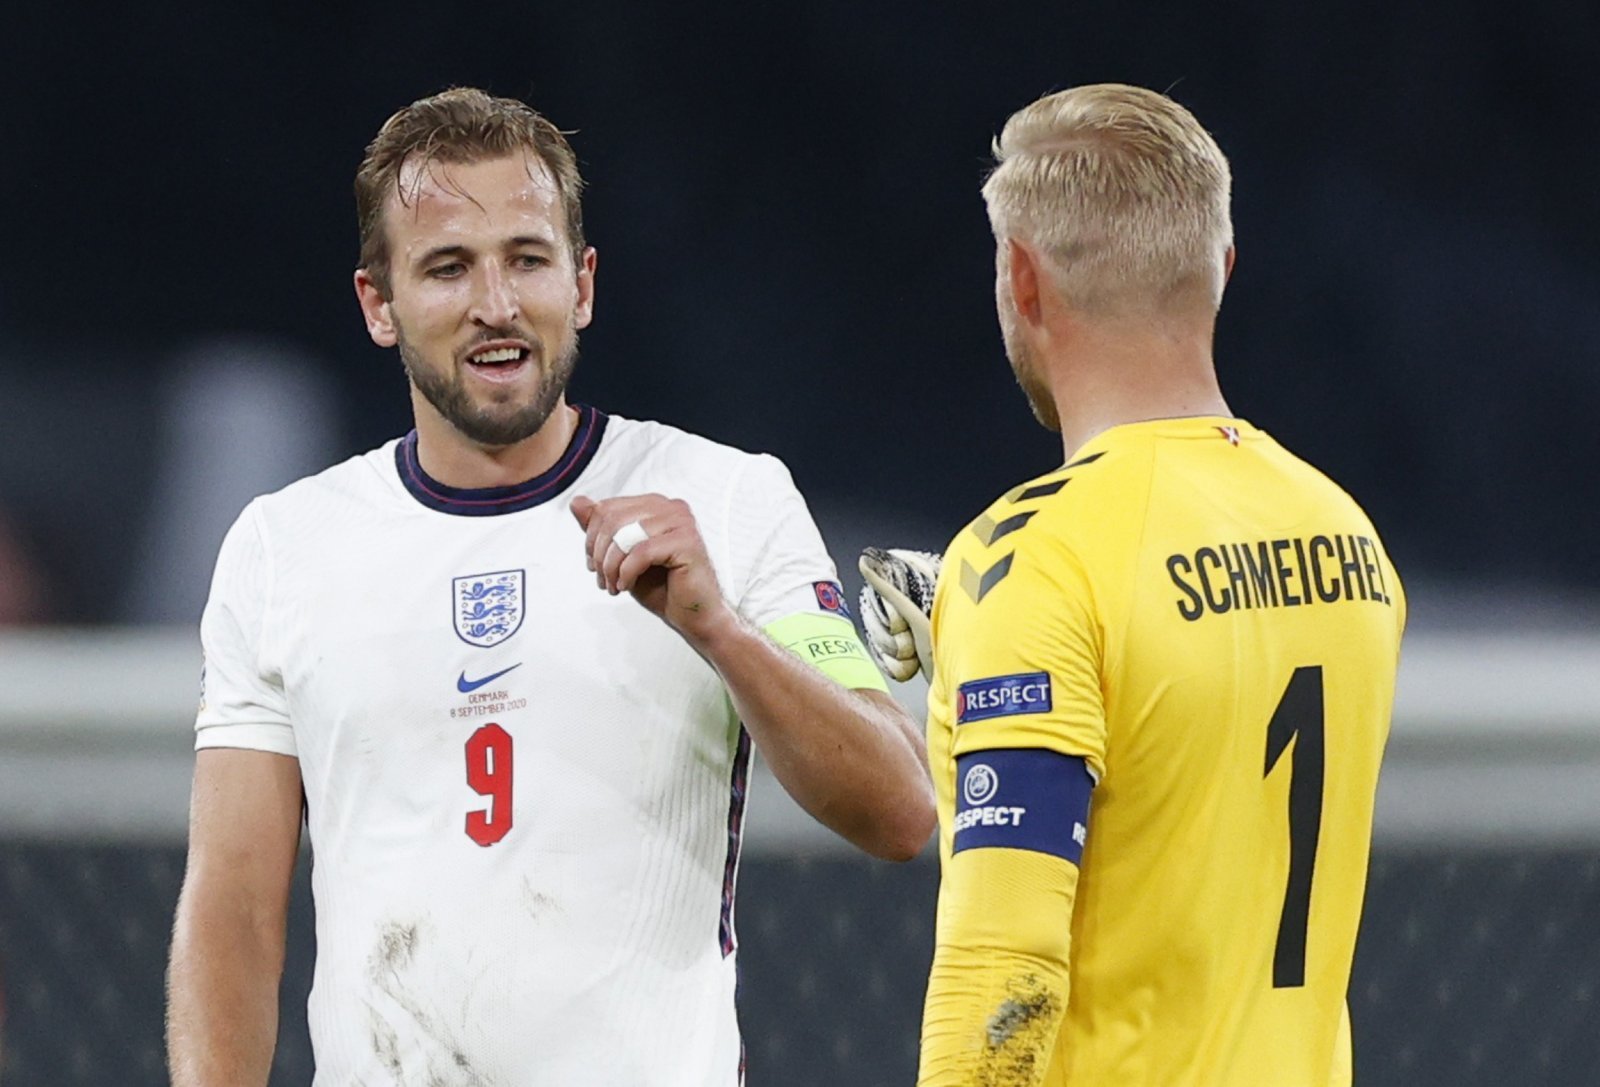  Cristiano Ronaldo, Romelu Lukaku, and Harry Kane are all pictured during their respective Euro 2024 Qualifiers matches.